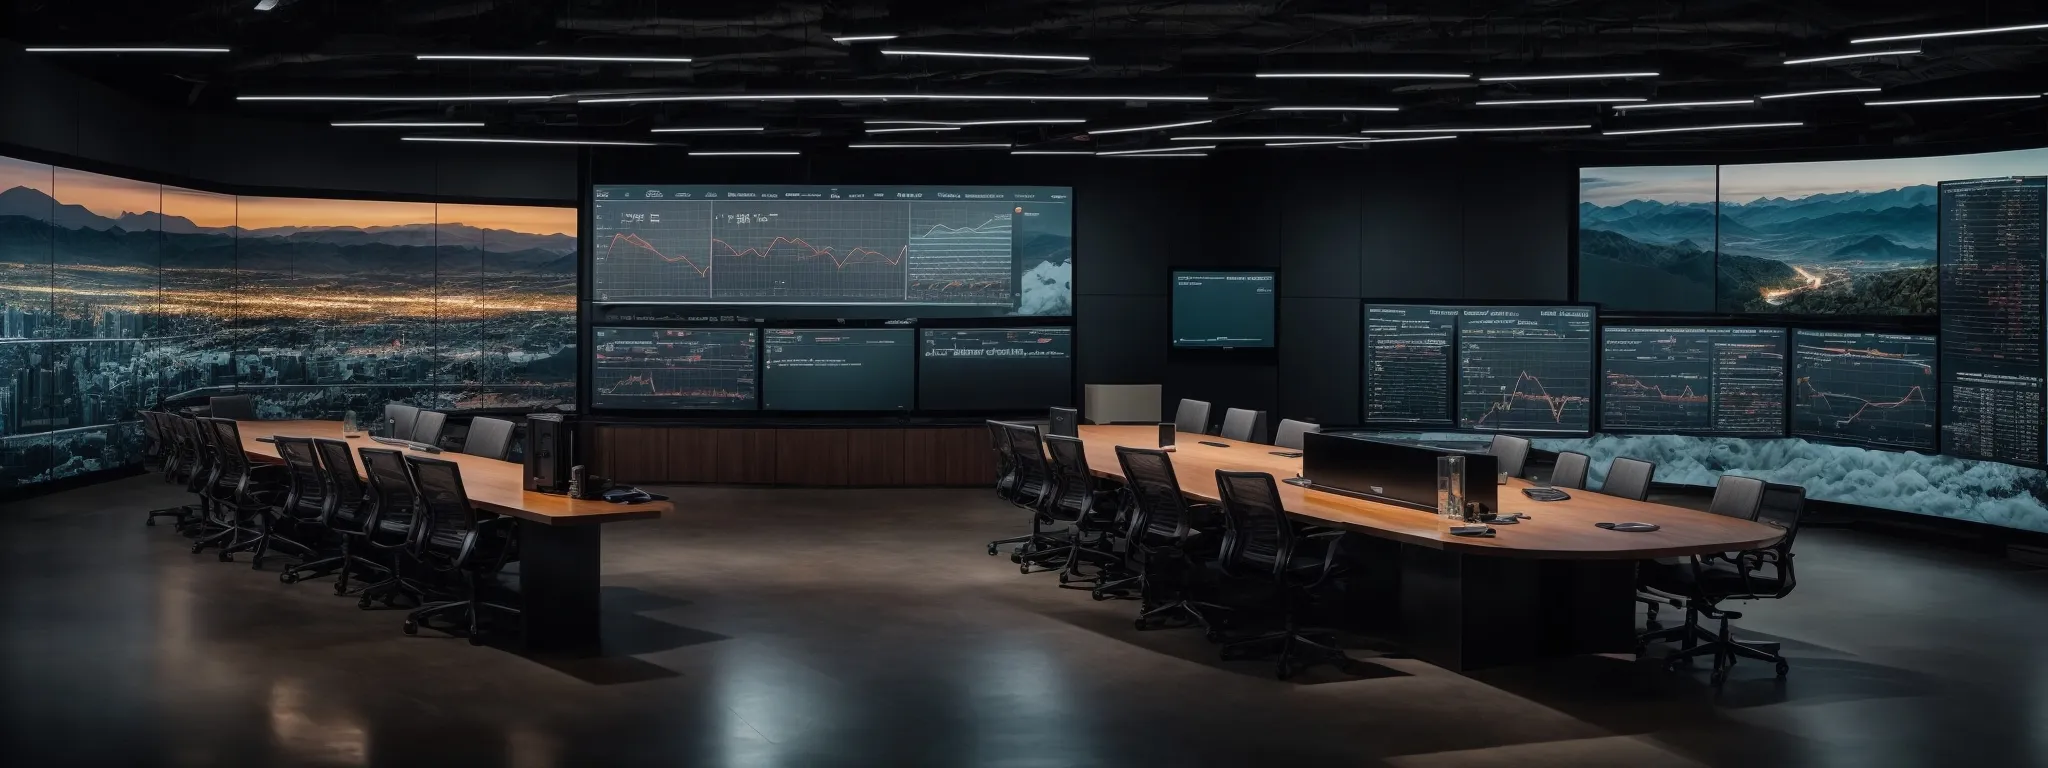 a professional conference room with a large digital screen displaying graphs and website analytics.